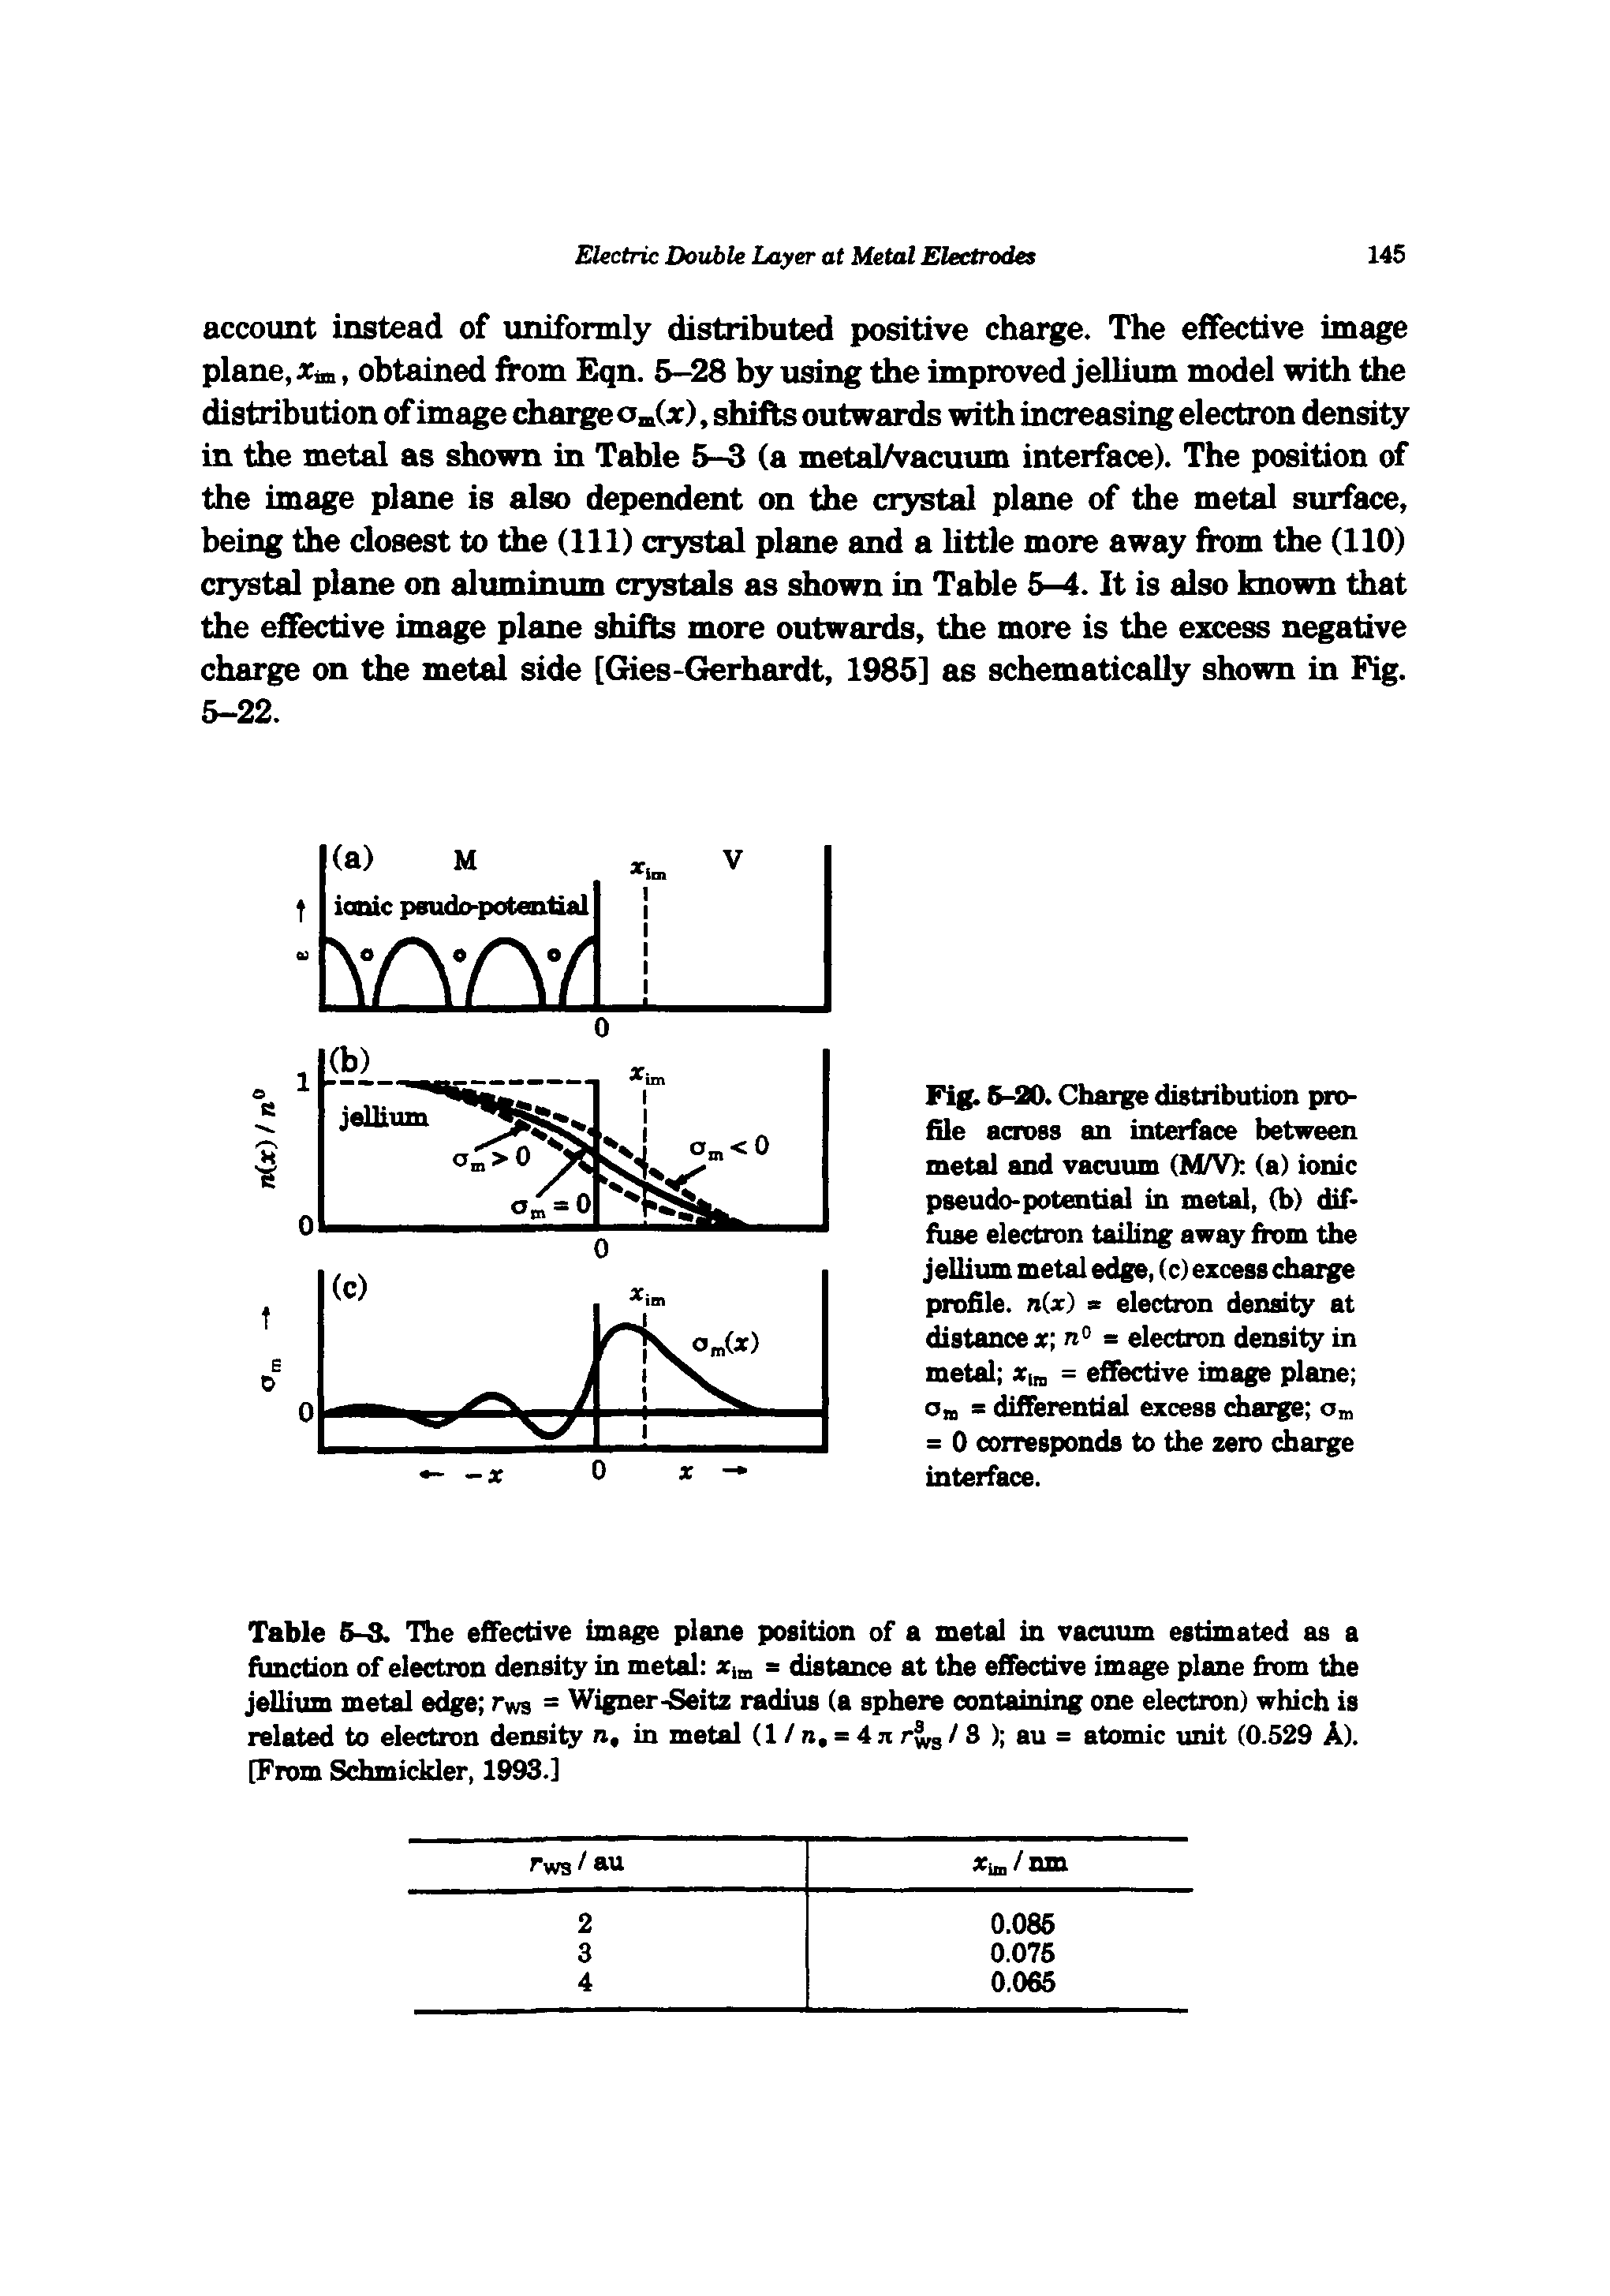 Fig. 6-20. Charge distribution profile across an interface between metal and vacuum (MAO (a) ionic pseudo-potential in metal, (b) diffuse electron tailing away from the jellium metal edge, (c) excess charge profile. n(x) s electron density at distance x = electron density in metal x, = effective image plane On = differential excess charge On = 0 corresponds to the zero charge interface.